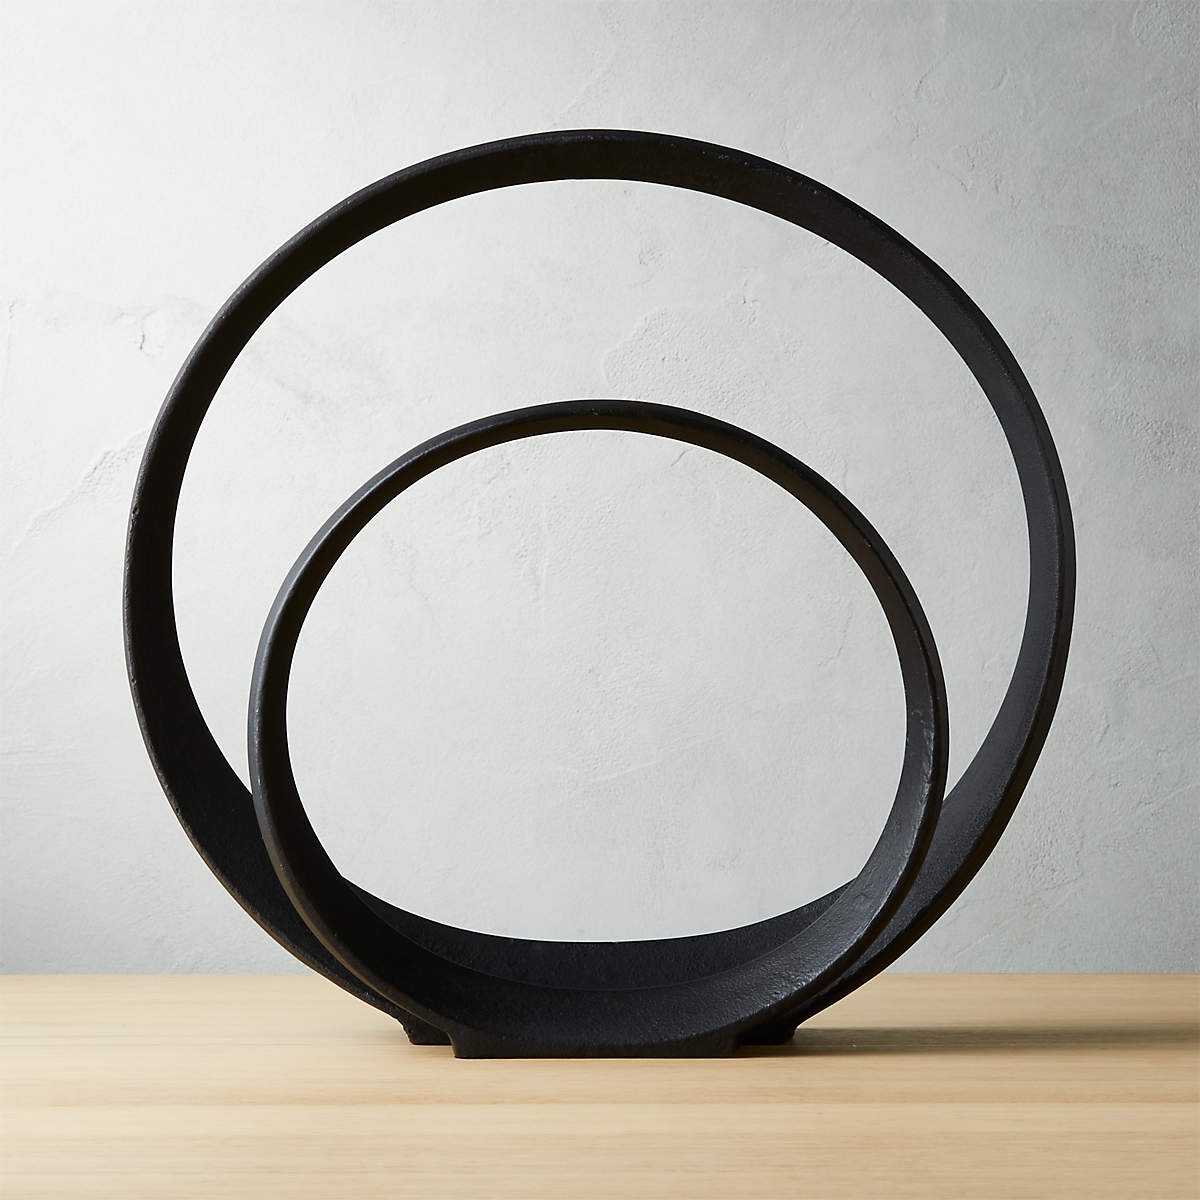 Small Metal Ring Sculpture - Image 3